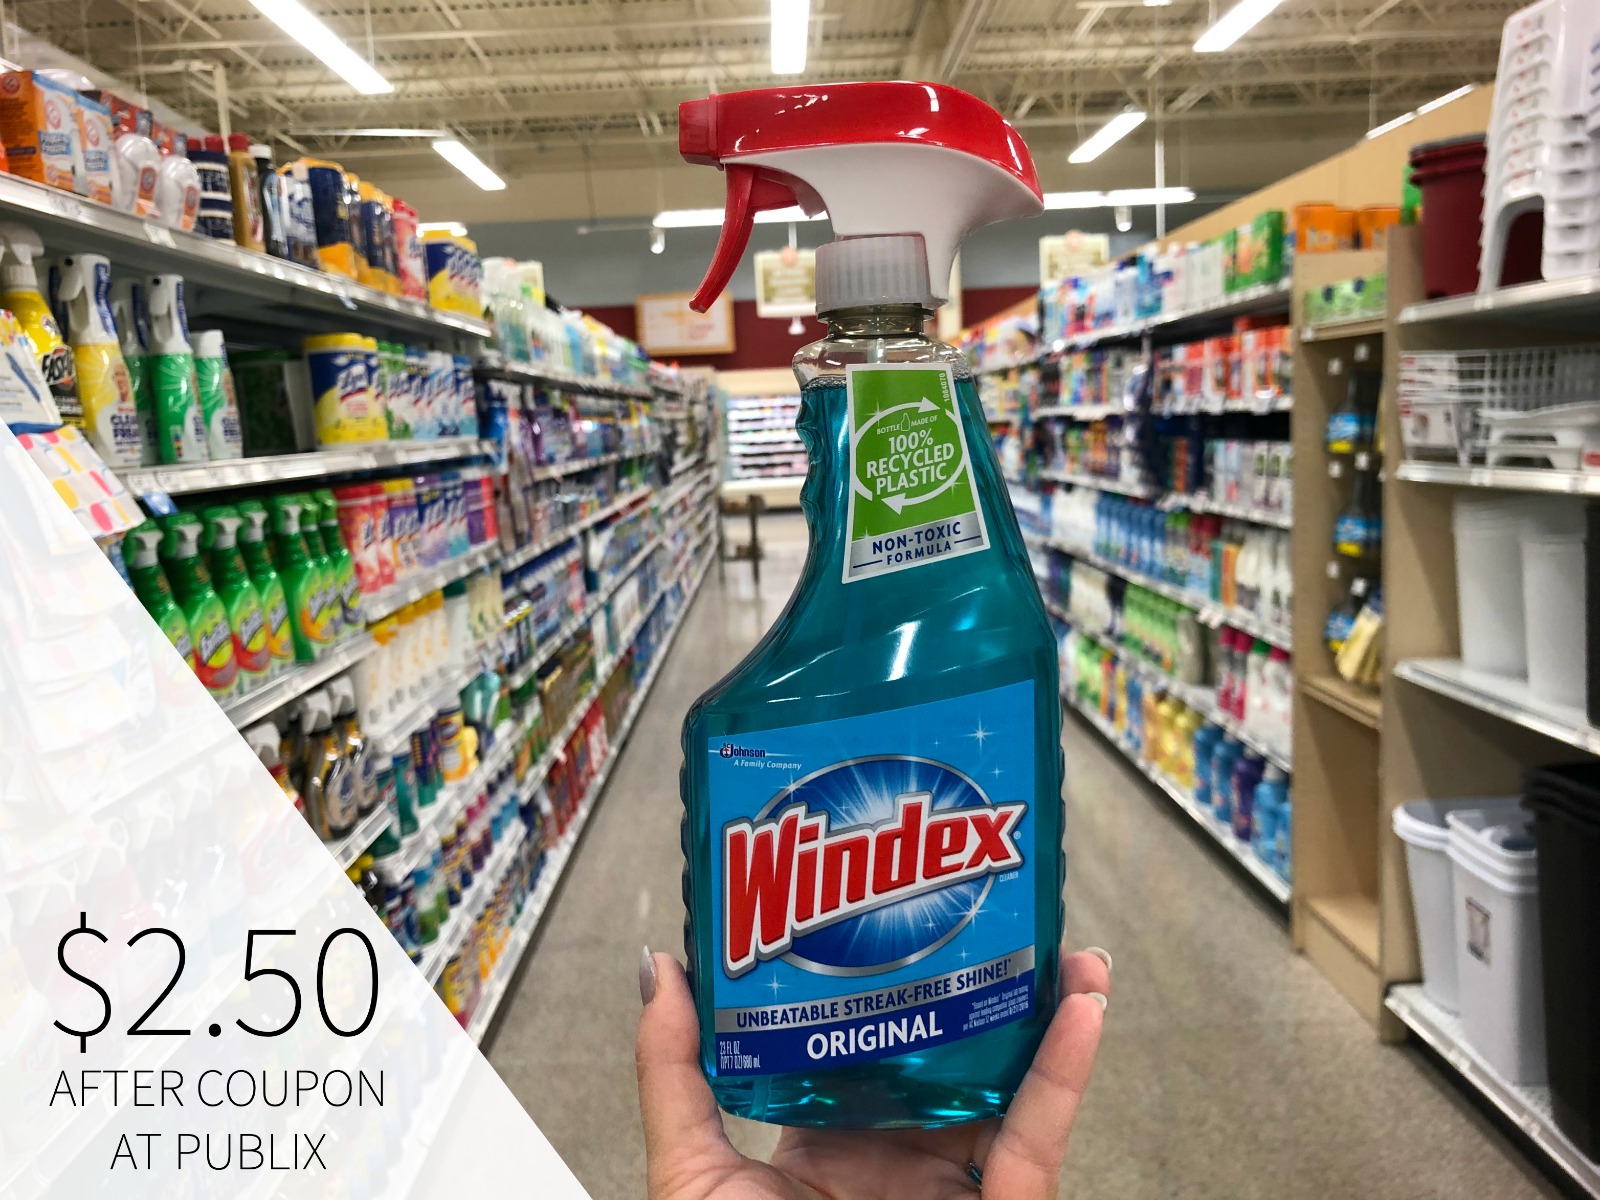 Get Your Home Ready For Holiday Guests & Save On Windex® Products At Publix